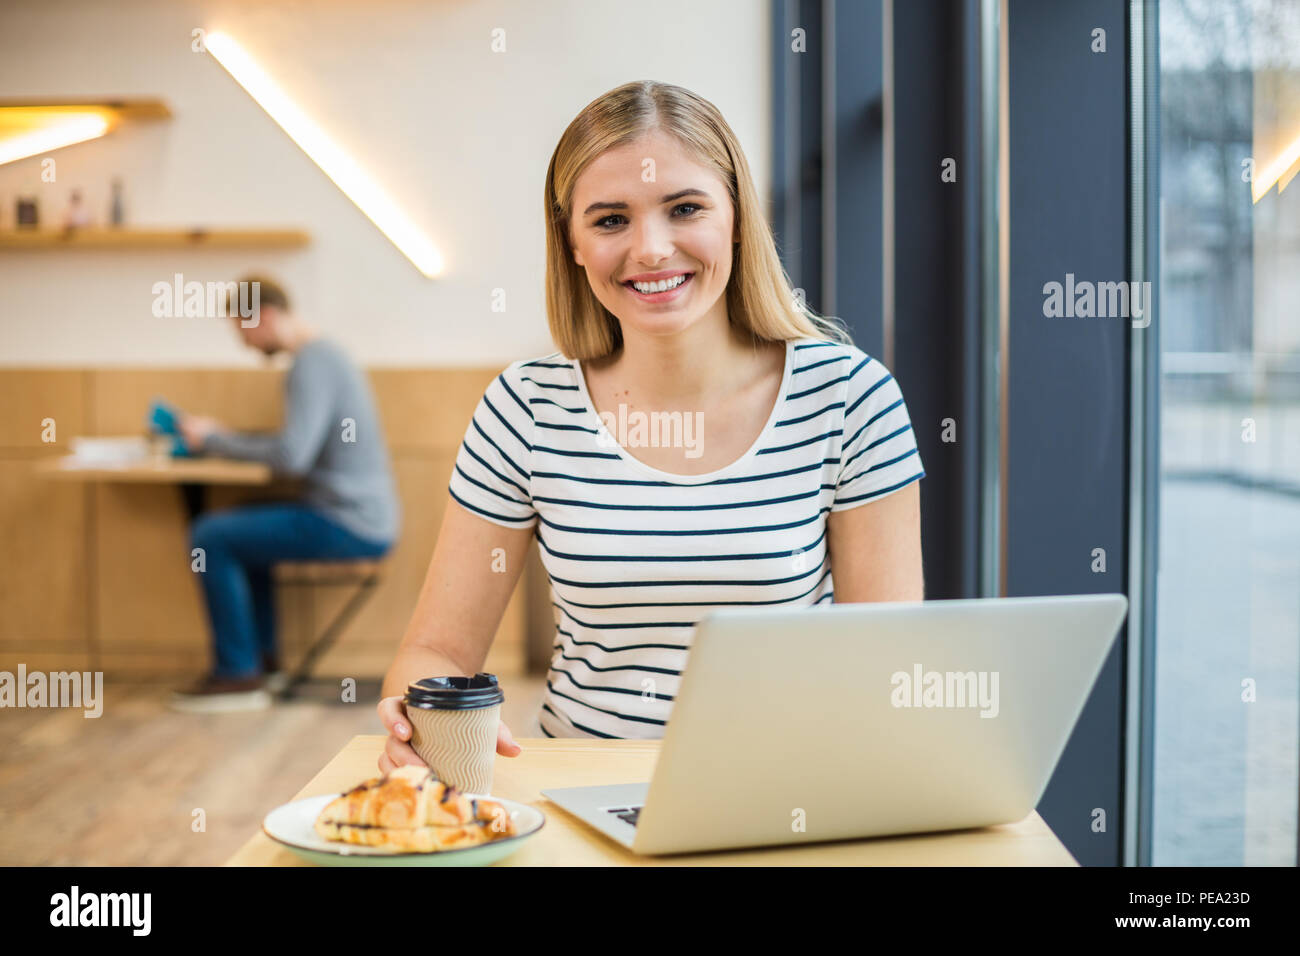 Energizing drink. Happy delighted positive woman sitting at the table and having coffee while enjoying her drink Stock Photo